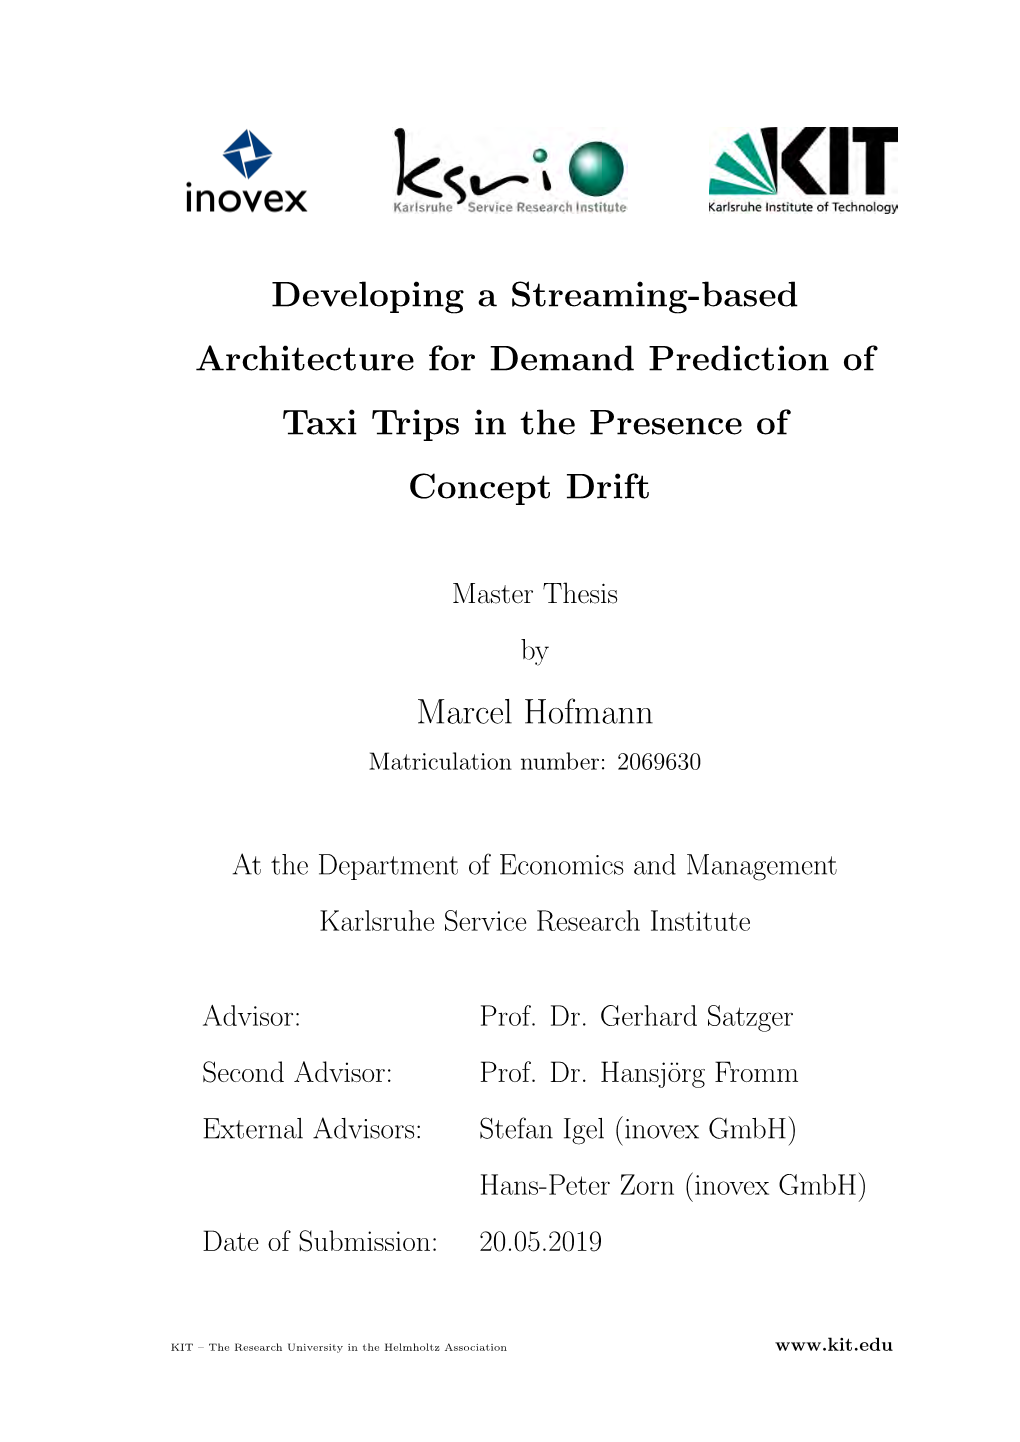 Developing a Streaming-Based Architecture for Demand Prediction of Taxi Trips in the Presence of Concept Drift